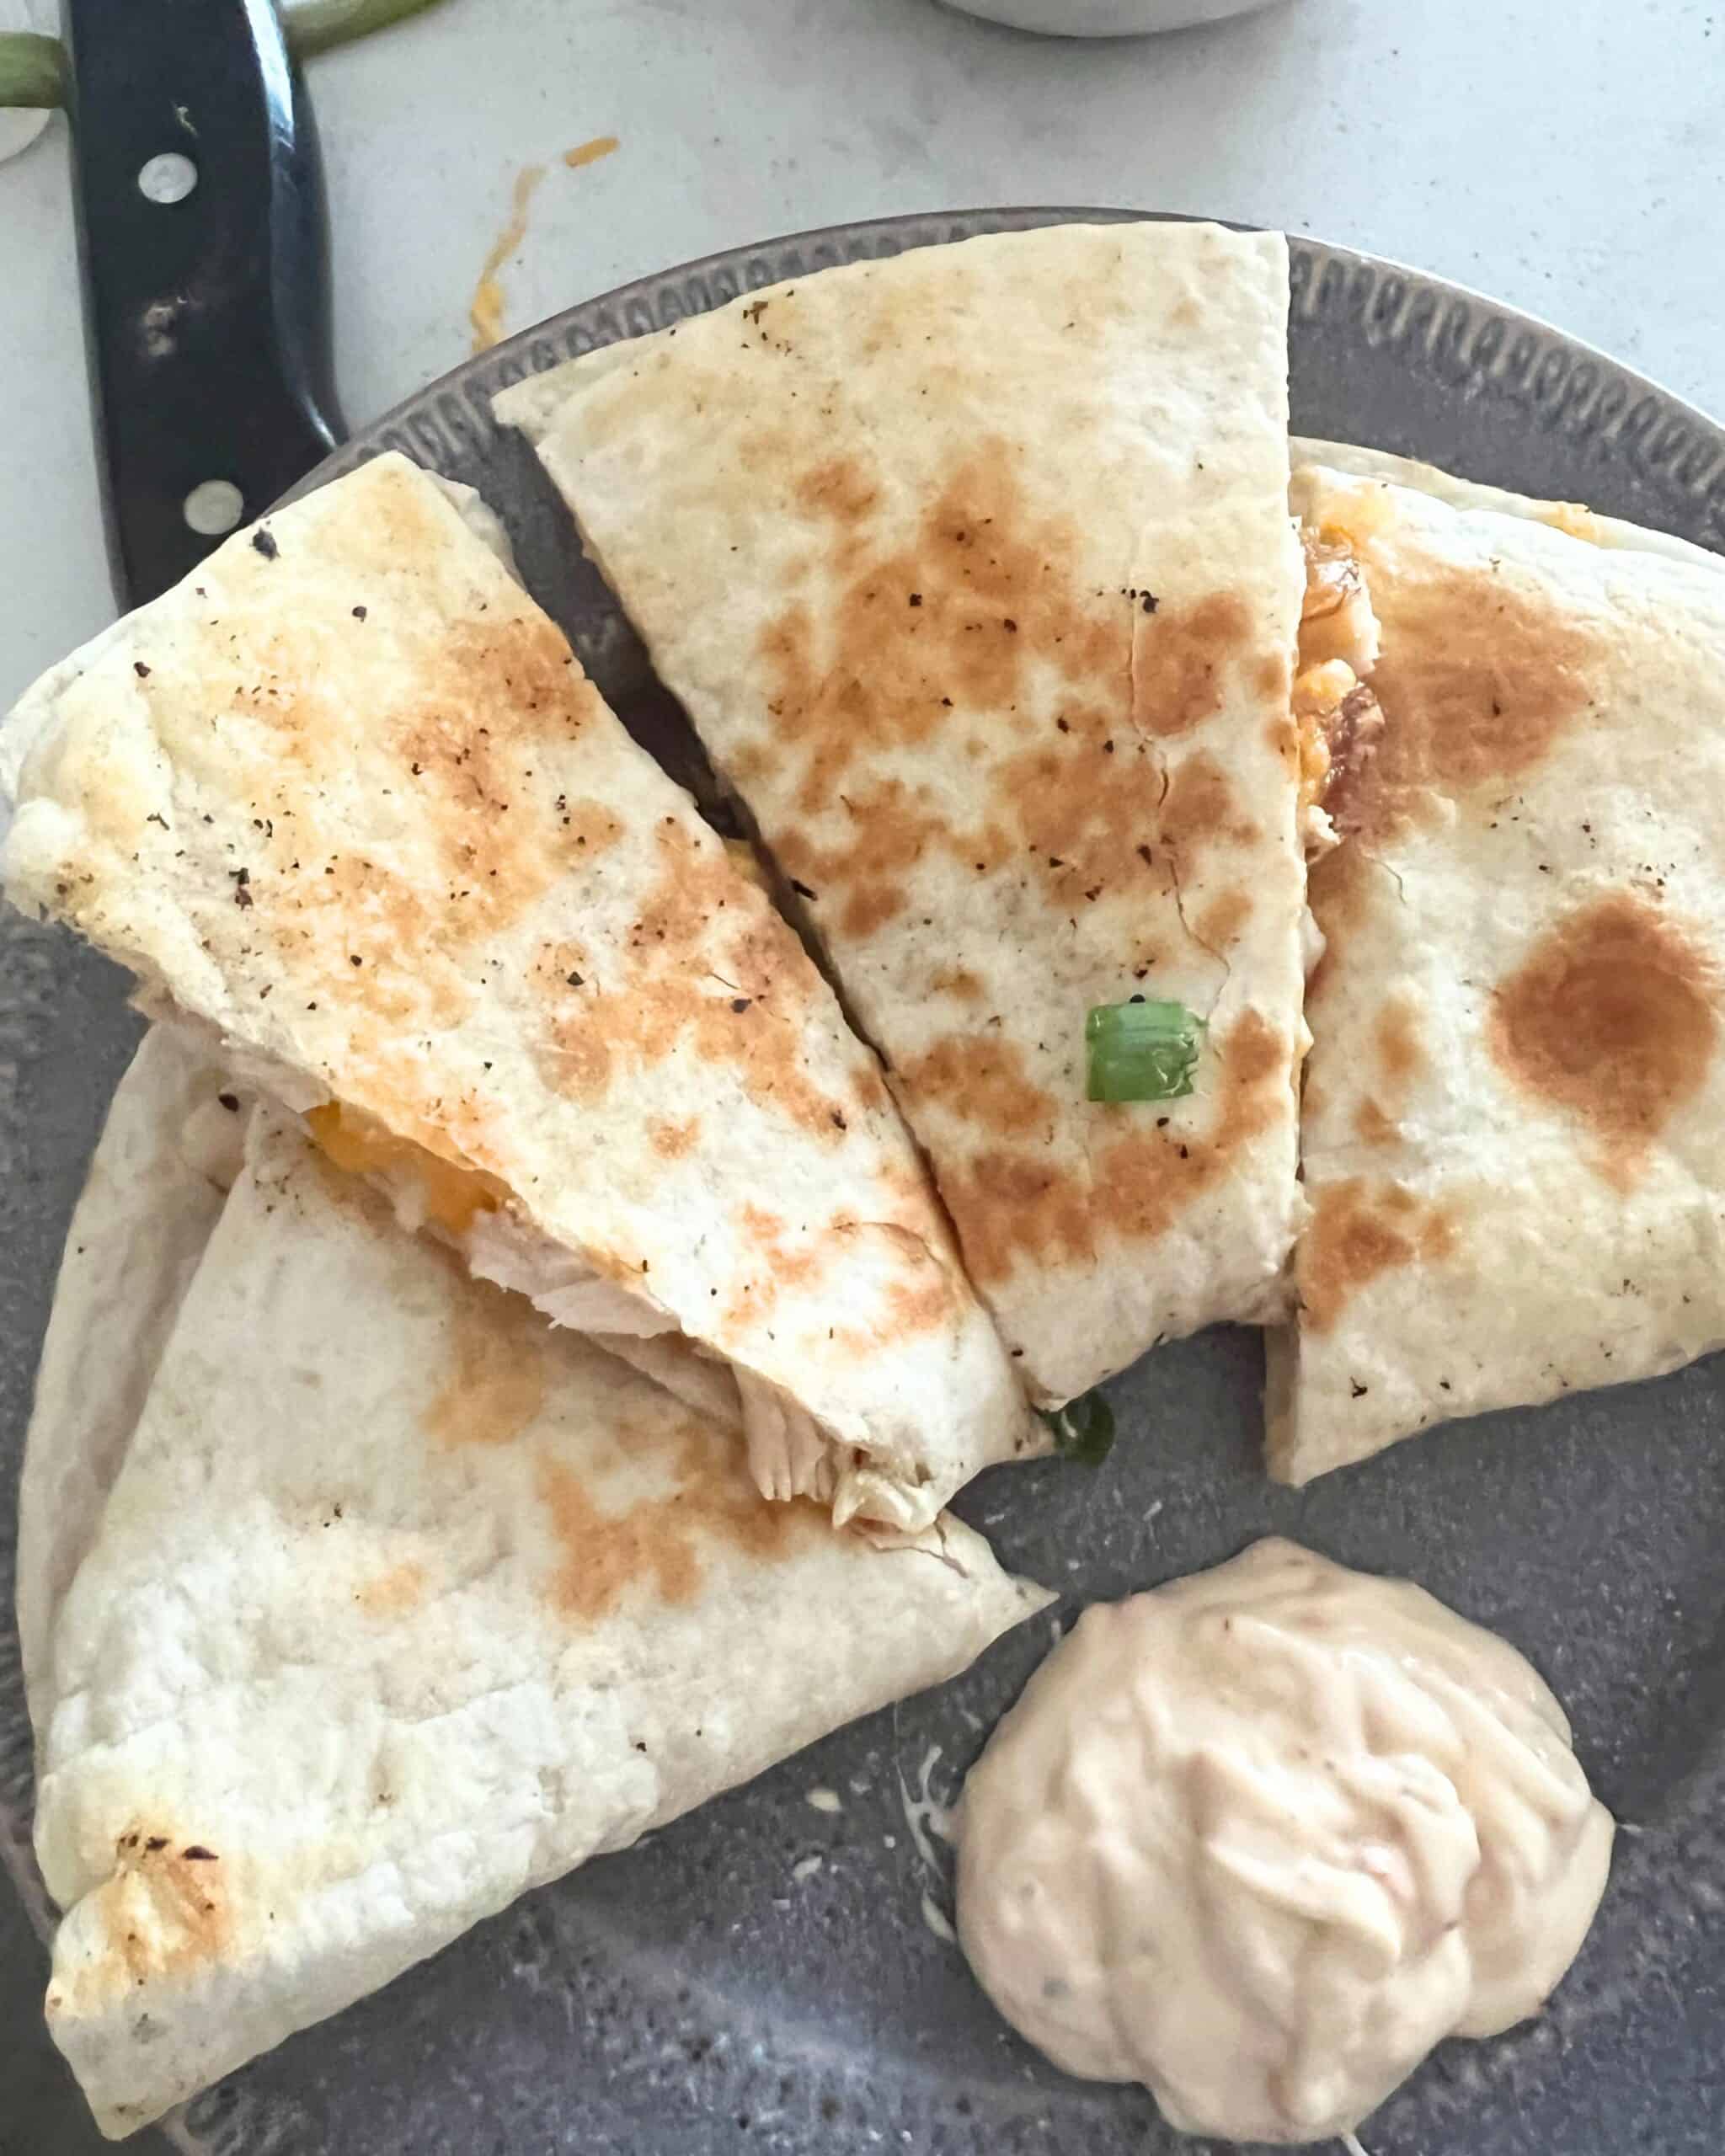 Blackstone Chicken quesadillas on a grey plate with Chipotle sauce. 